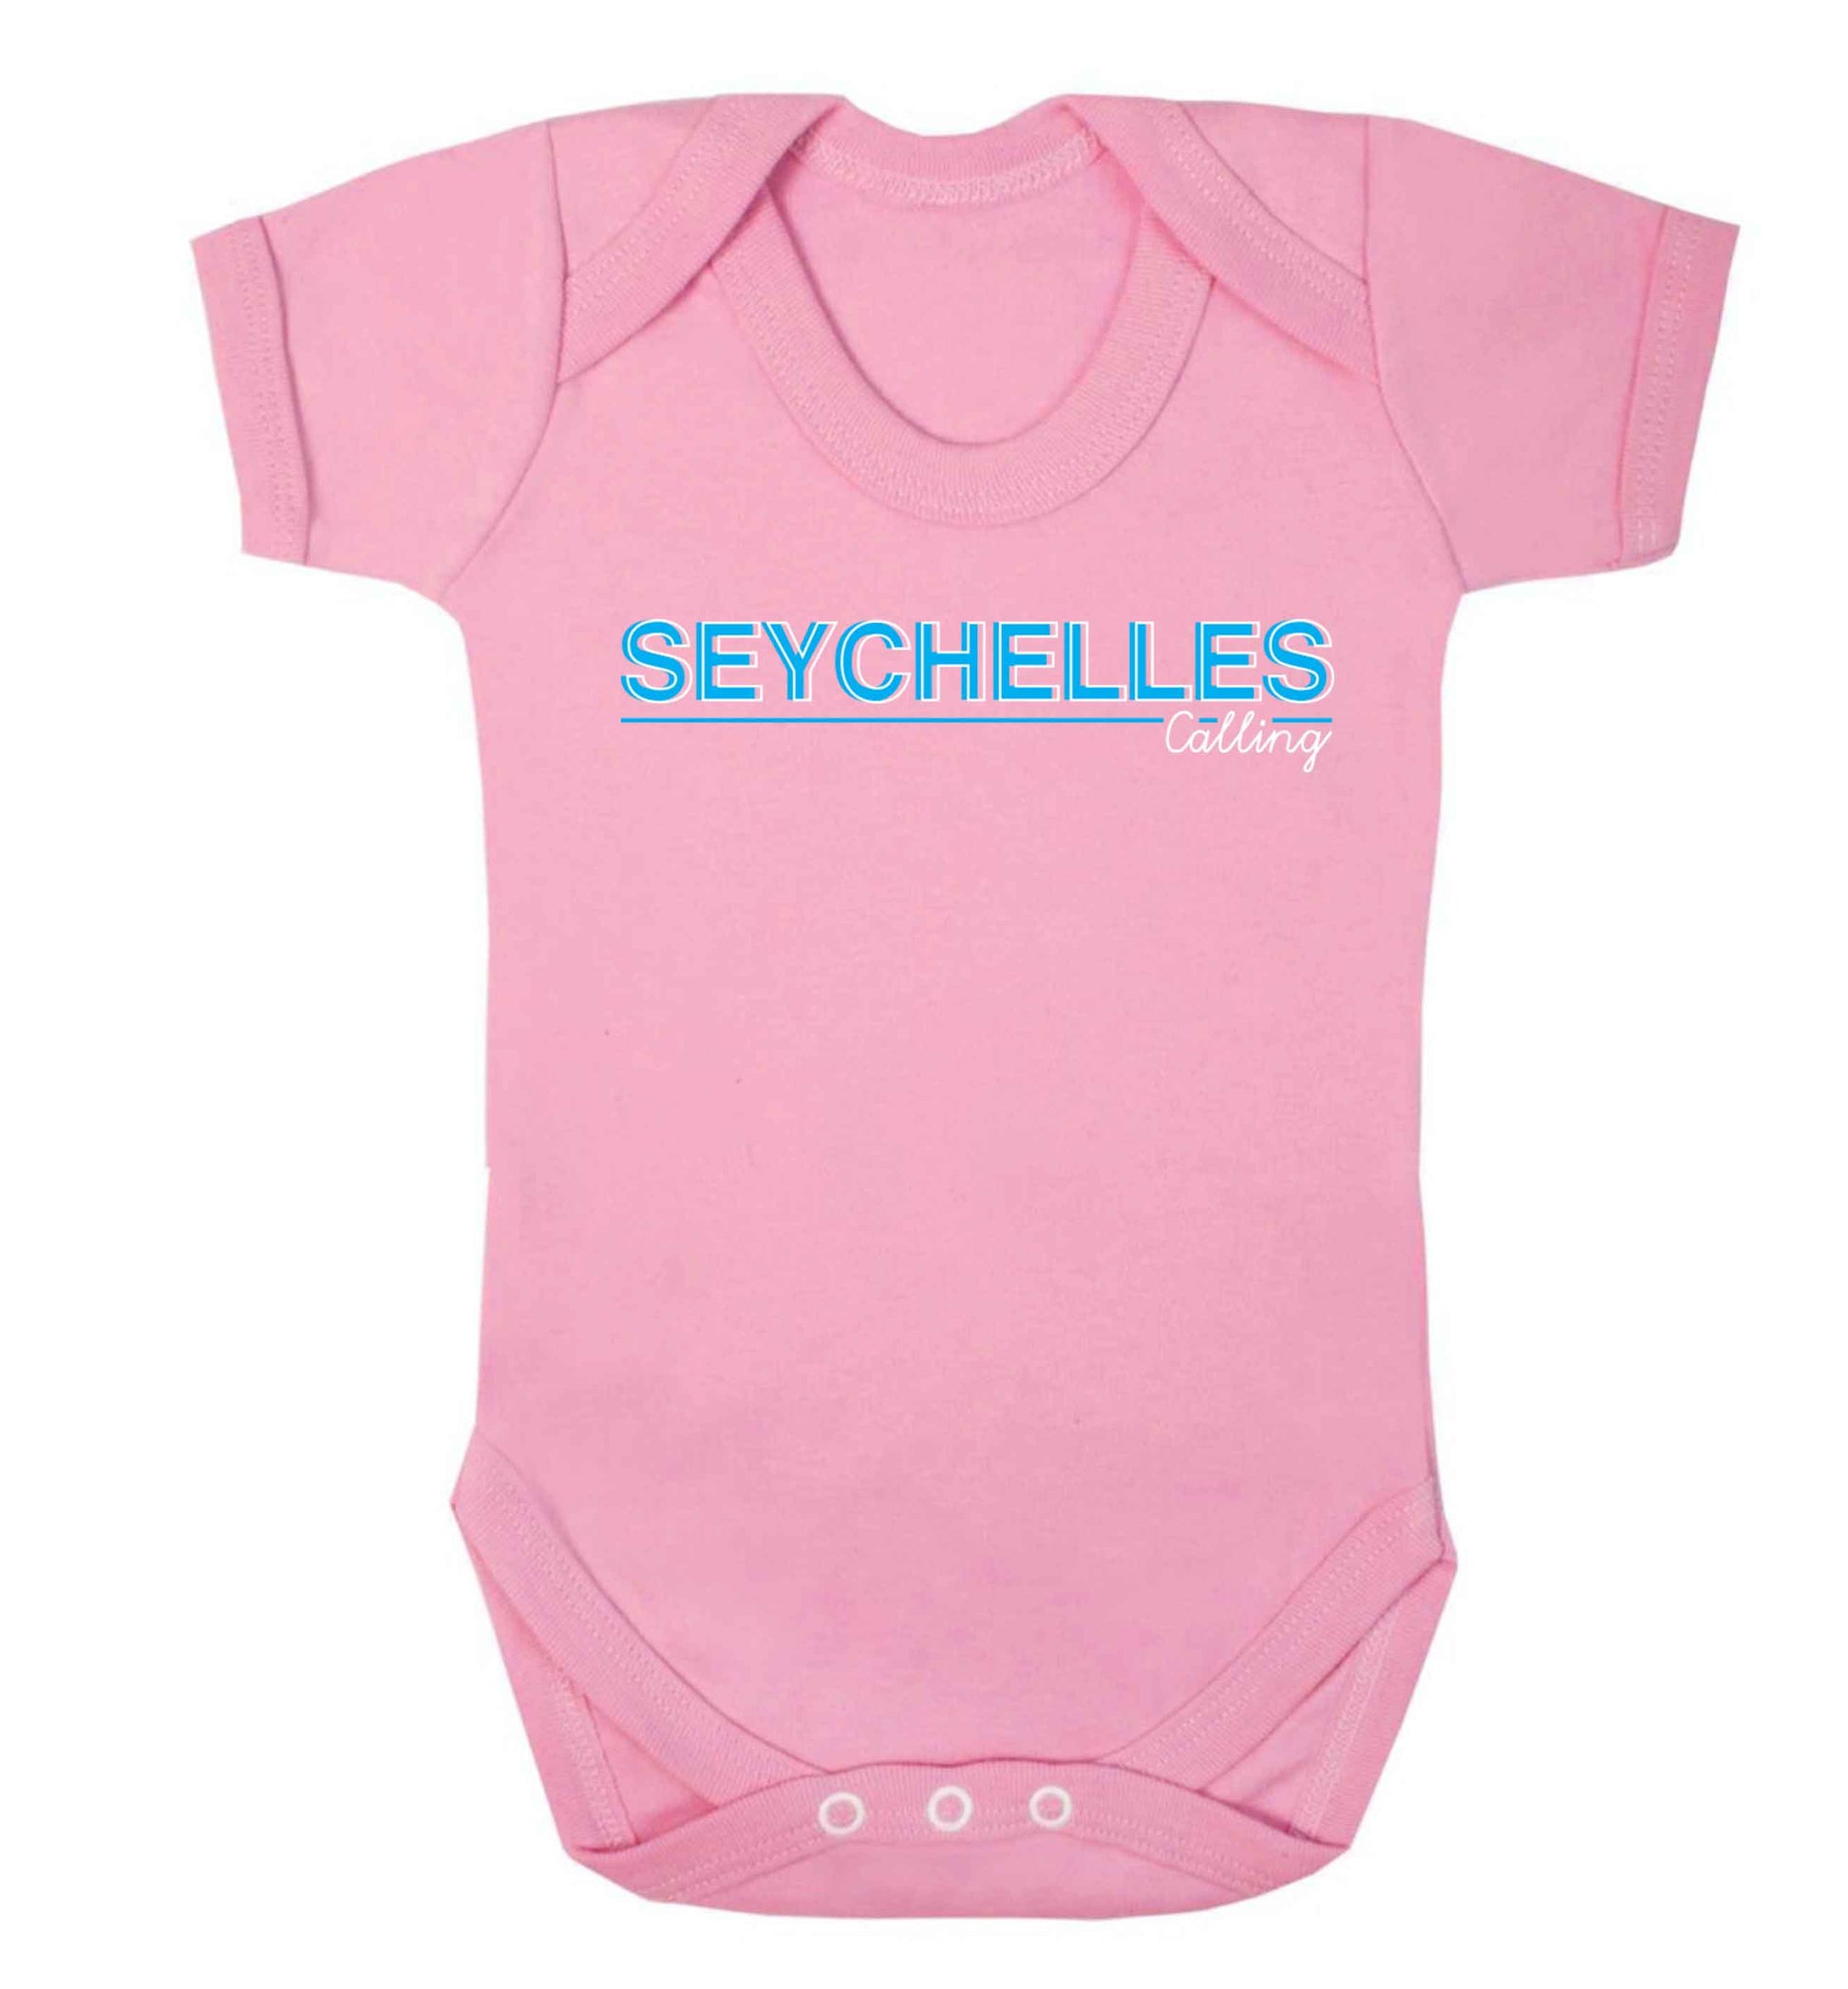 Seychelles calling Baby Vest pale pink 18-24 months